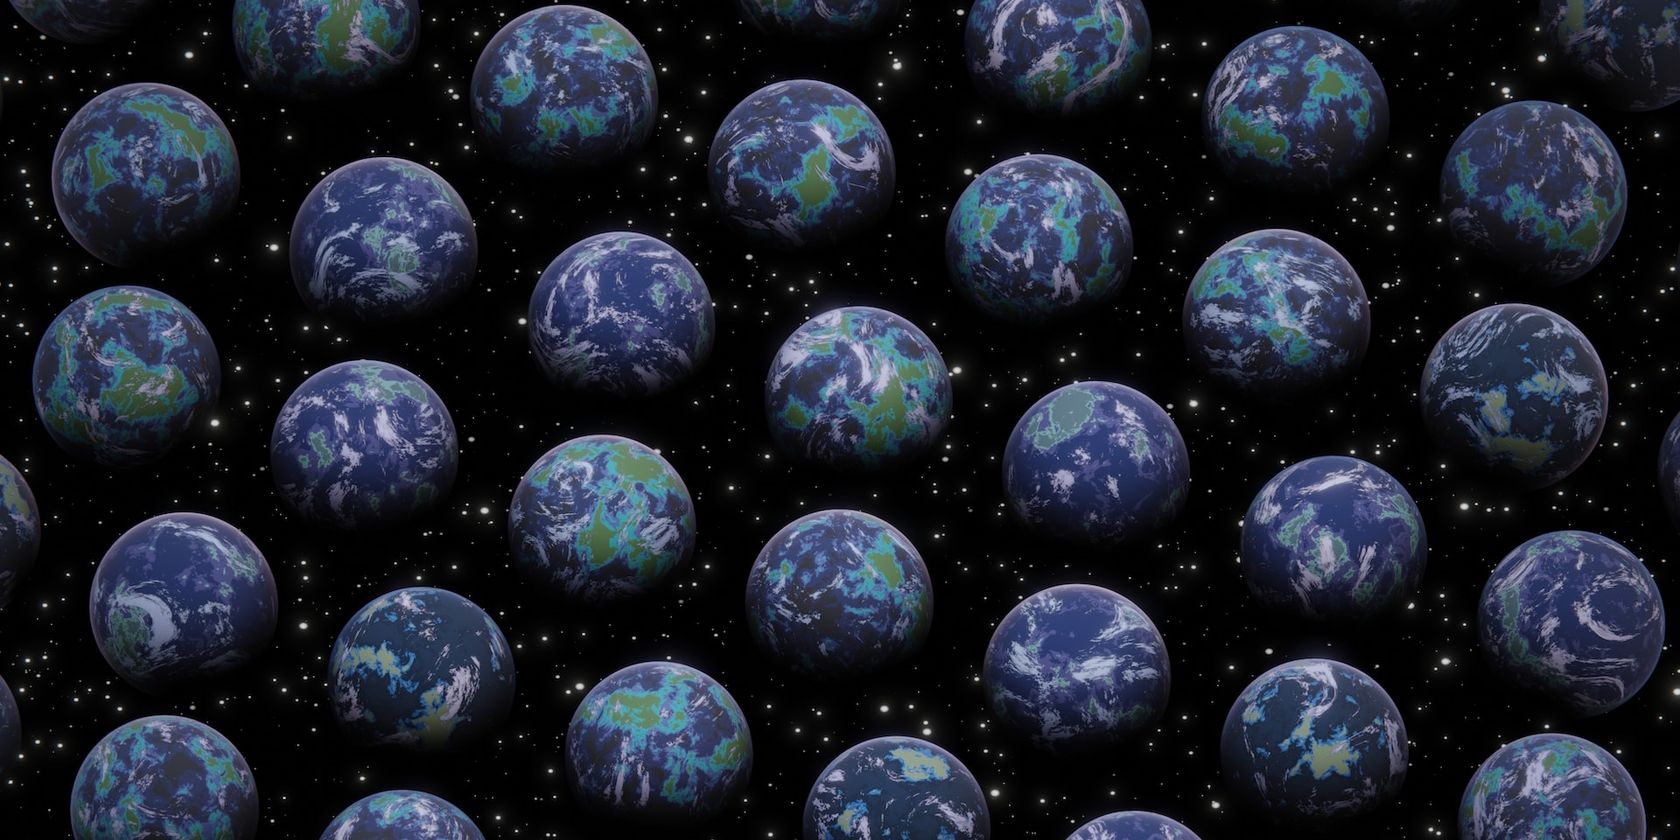 several earths in space